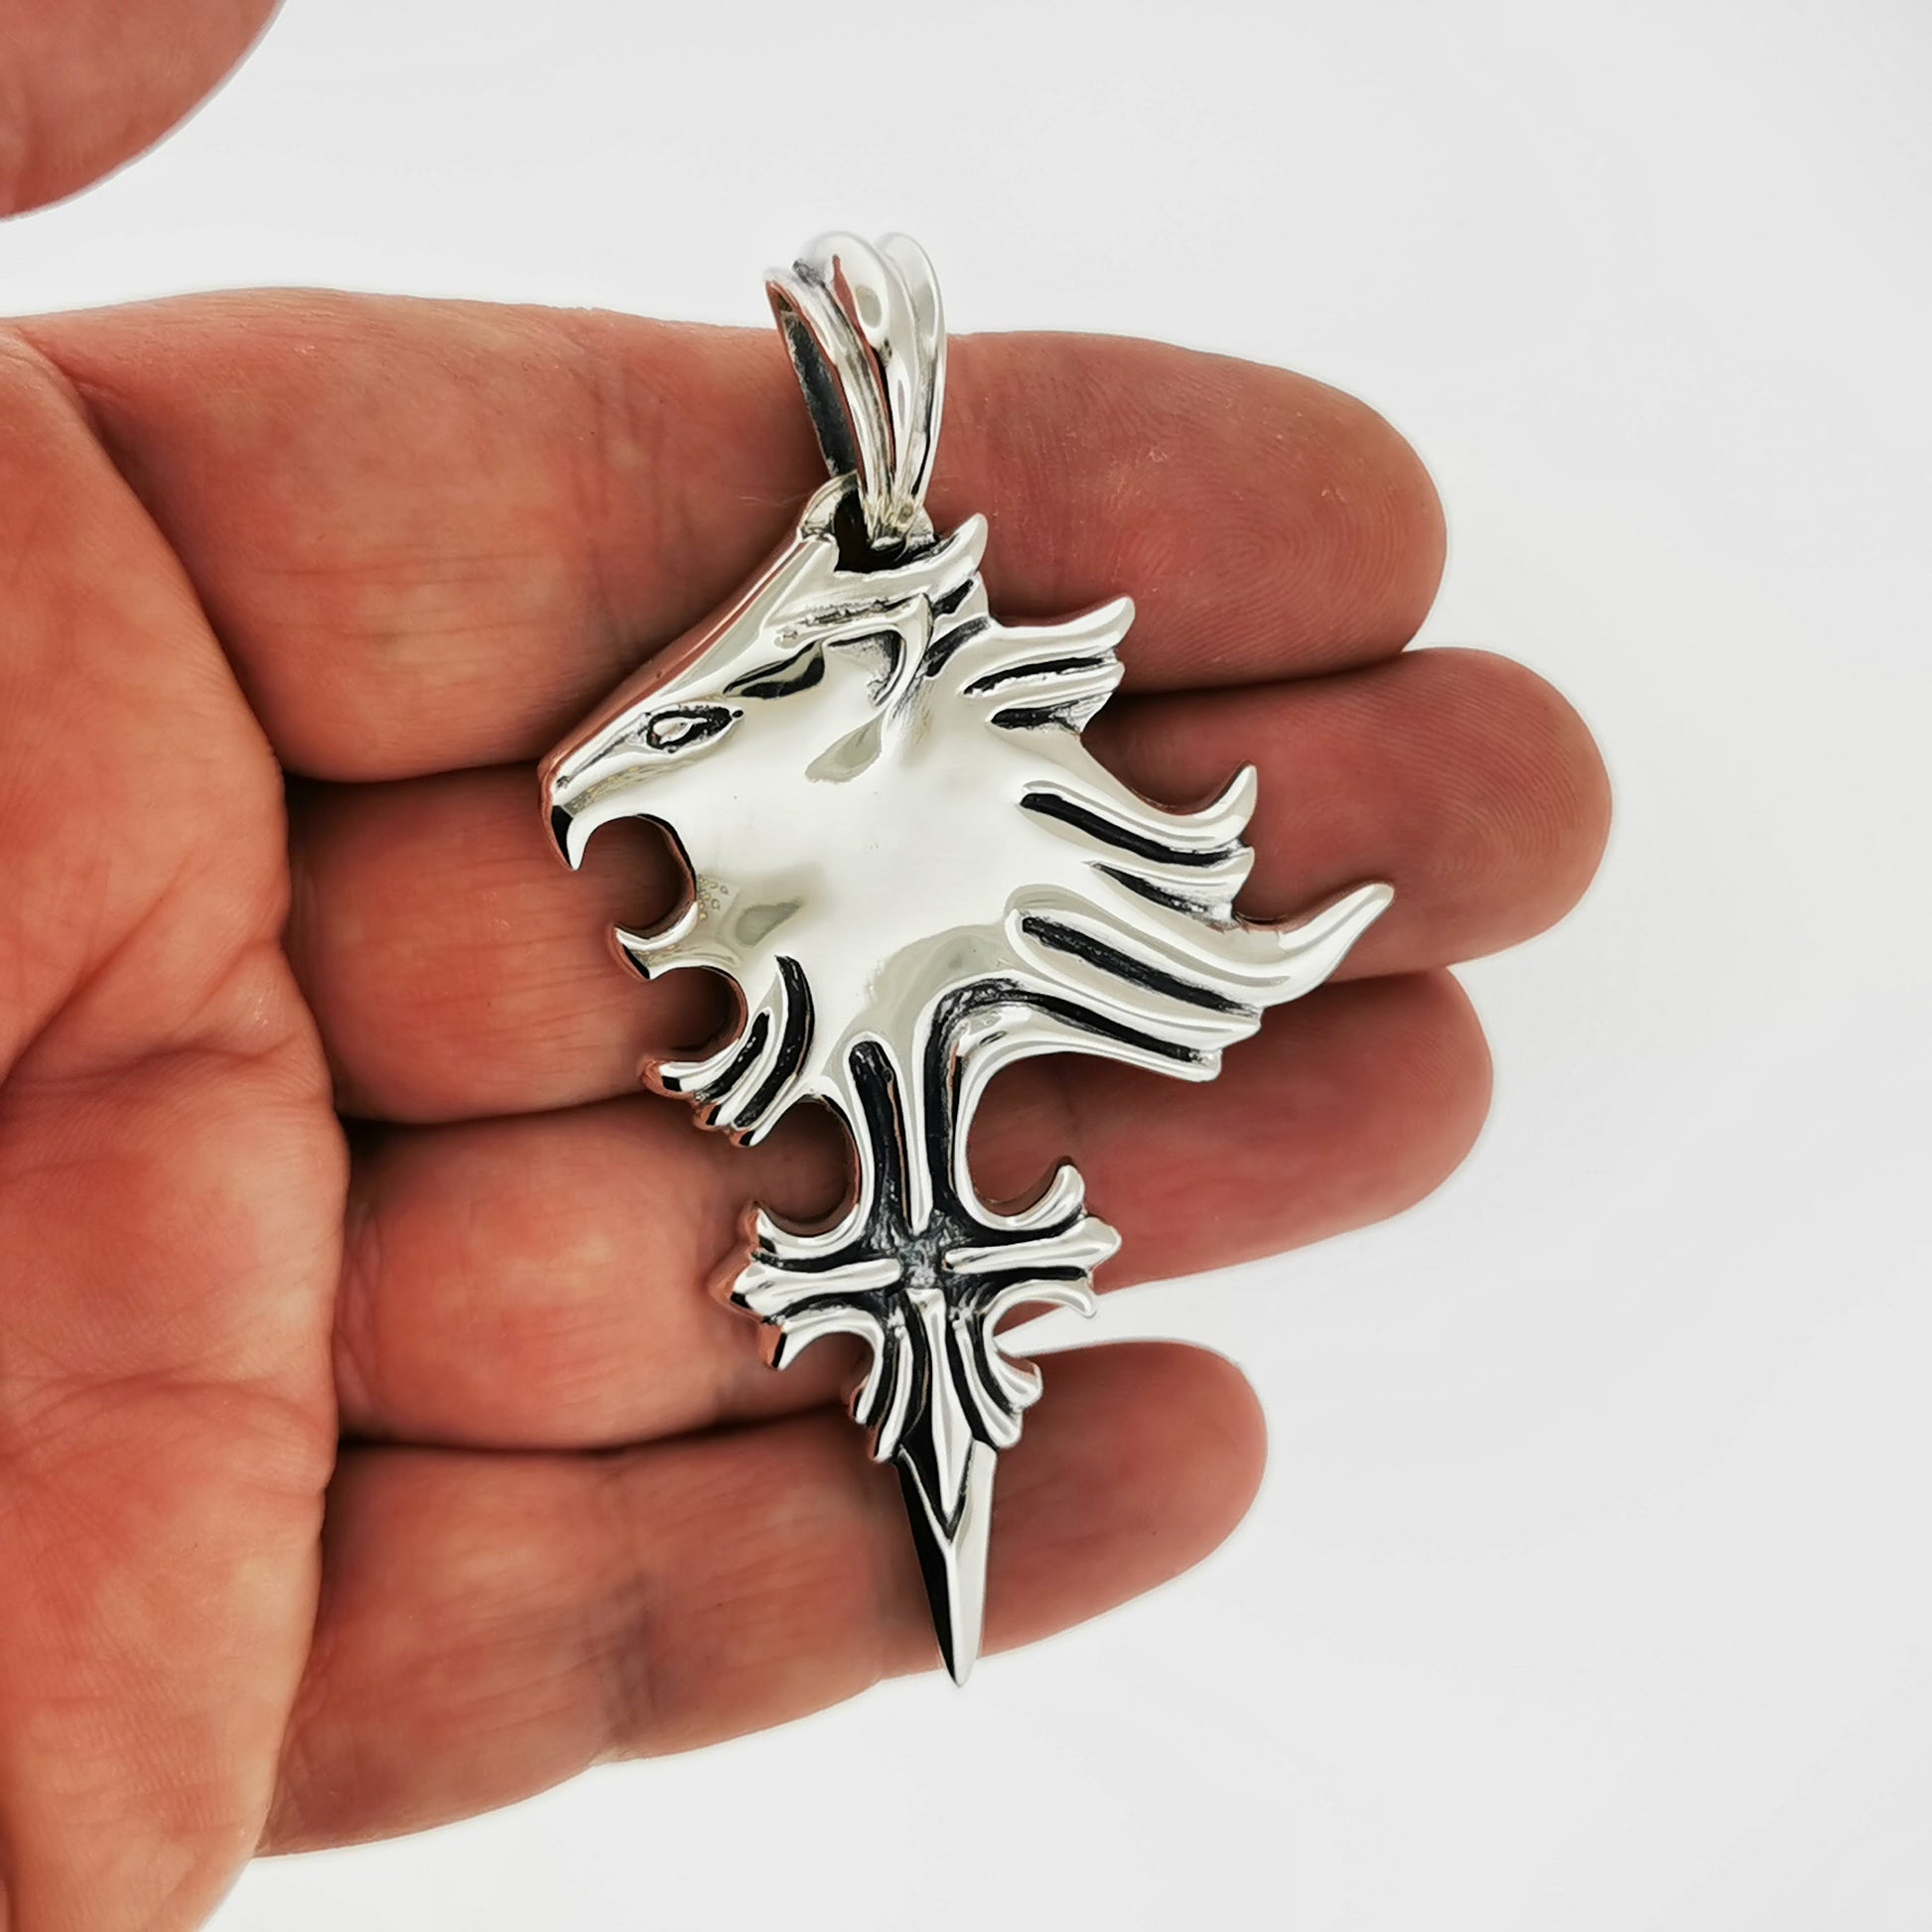 Large Final Fantasy 8 Squall Griever Pendant in 925 Silver or Bronze, FFVIII Cosplay Pendant, FFVIII Sleeping Lion Pendant, FF8 Pendant,  Final Fantasy 8 Squall Griever Pendant, Silver FF8 Sleeping Lion Pendant, Silver Final Fantasy VIII Pendant